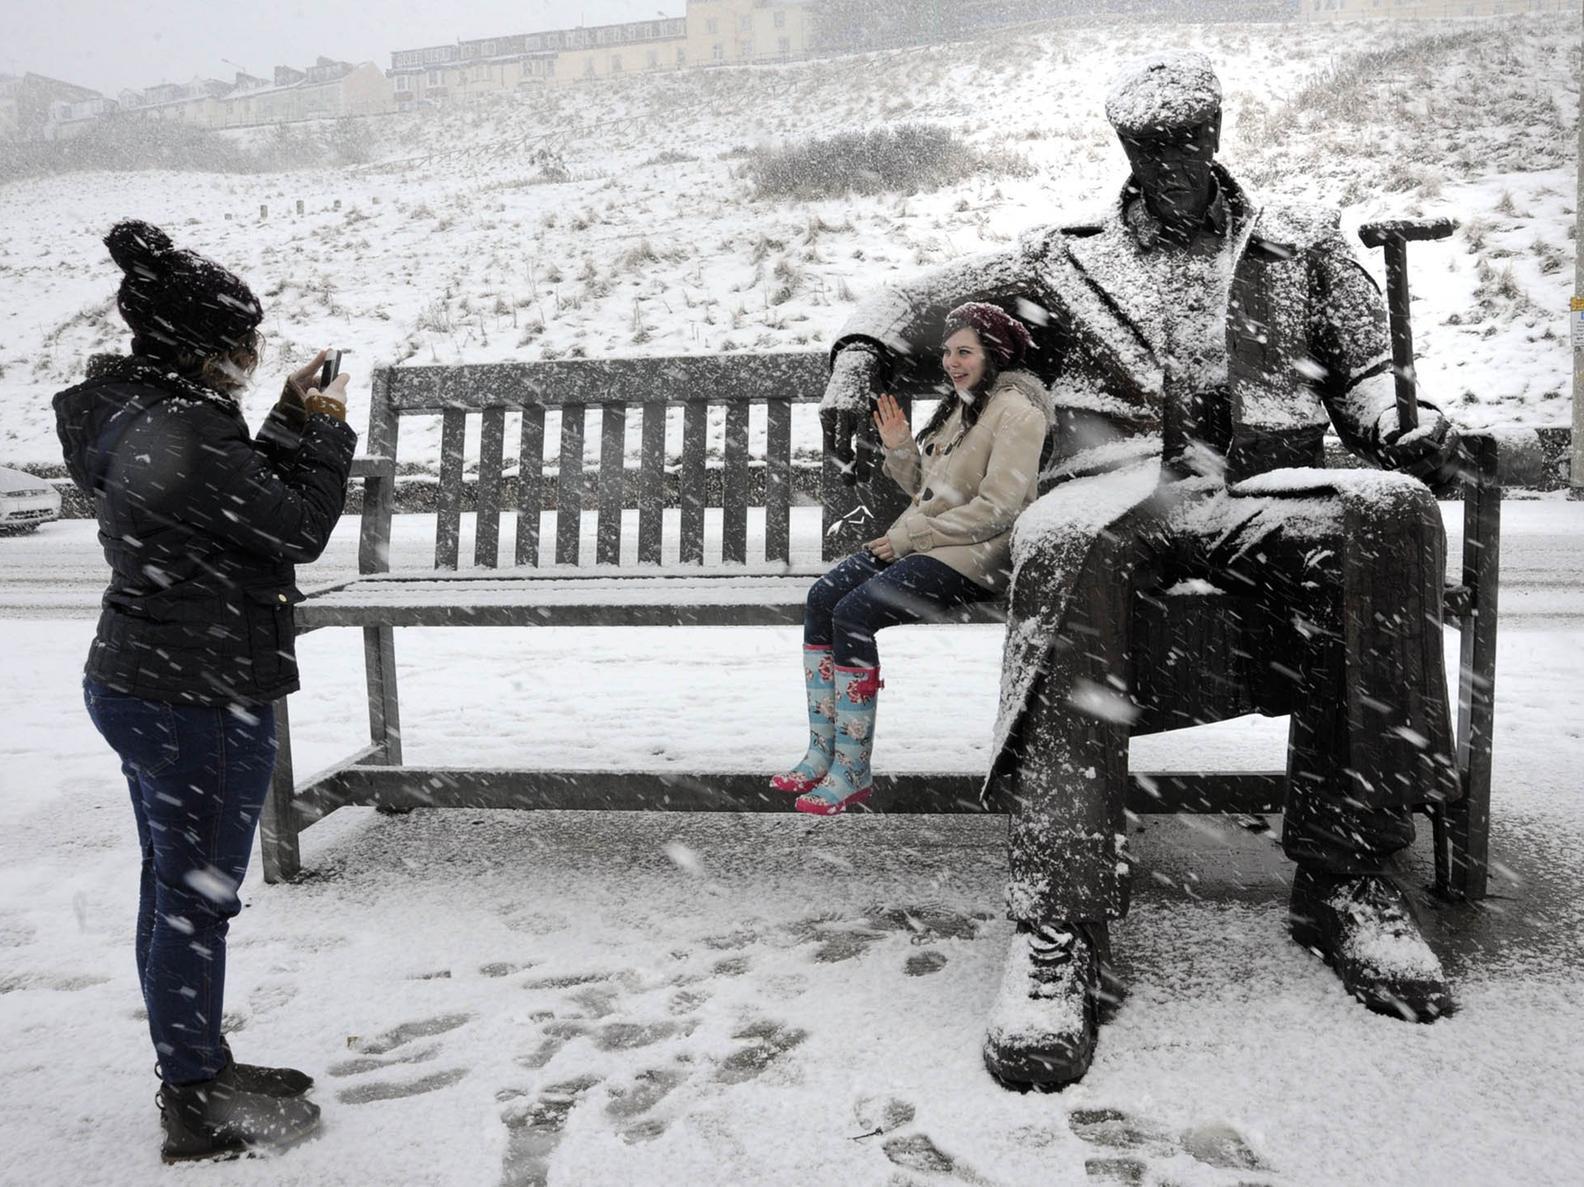 Snowy scenes in Scarborough. Picture by Andrew Higgins